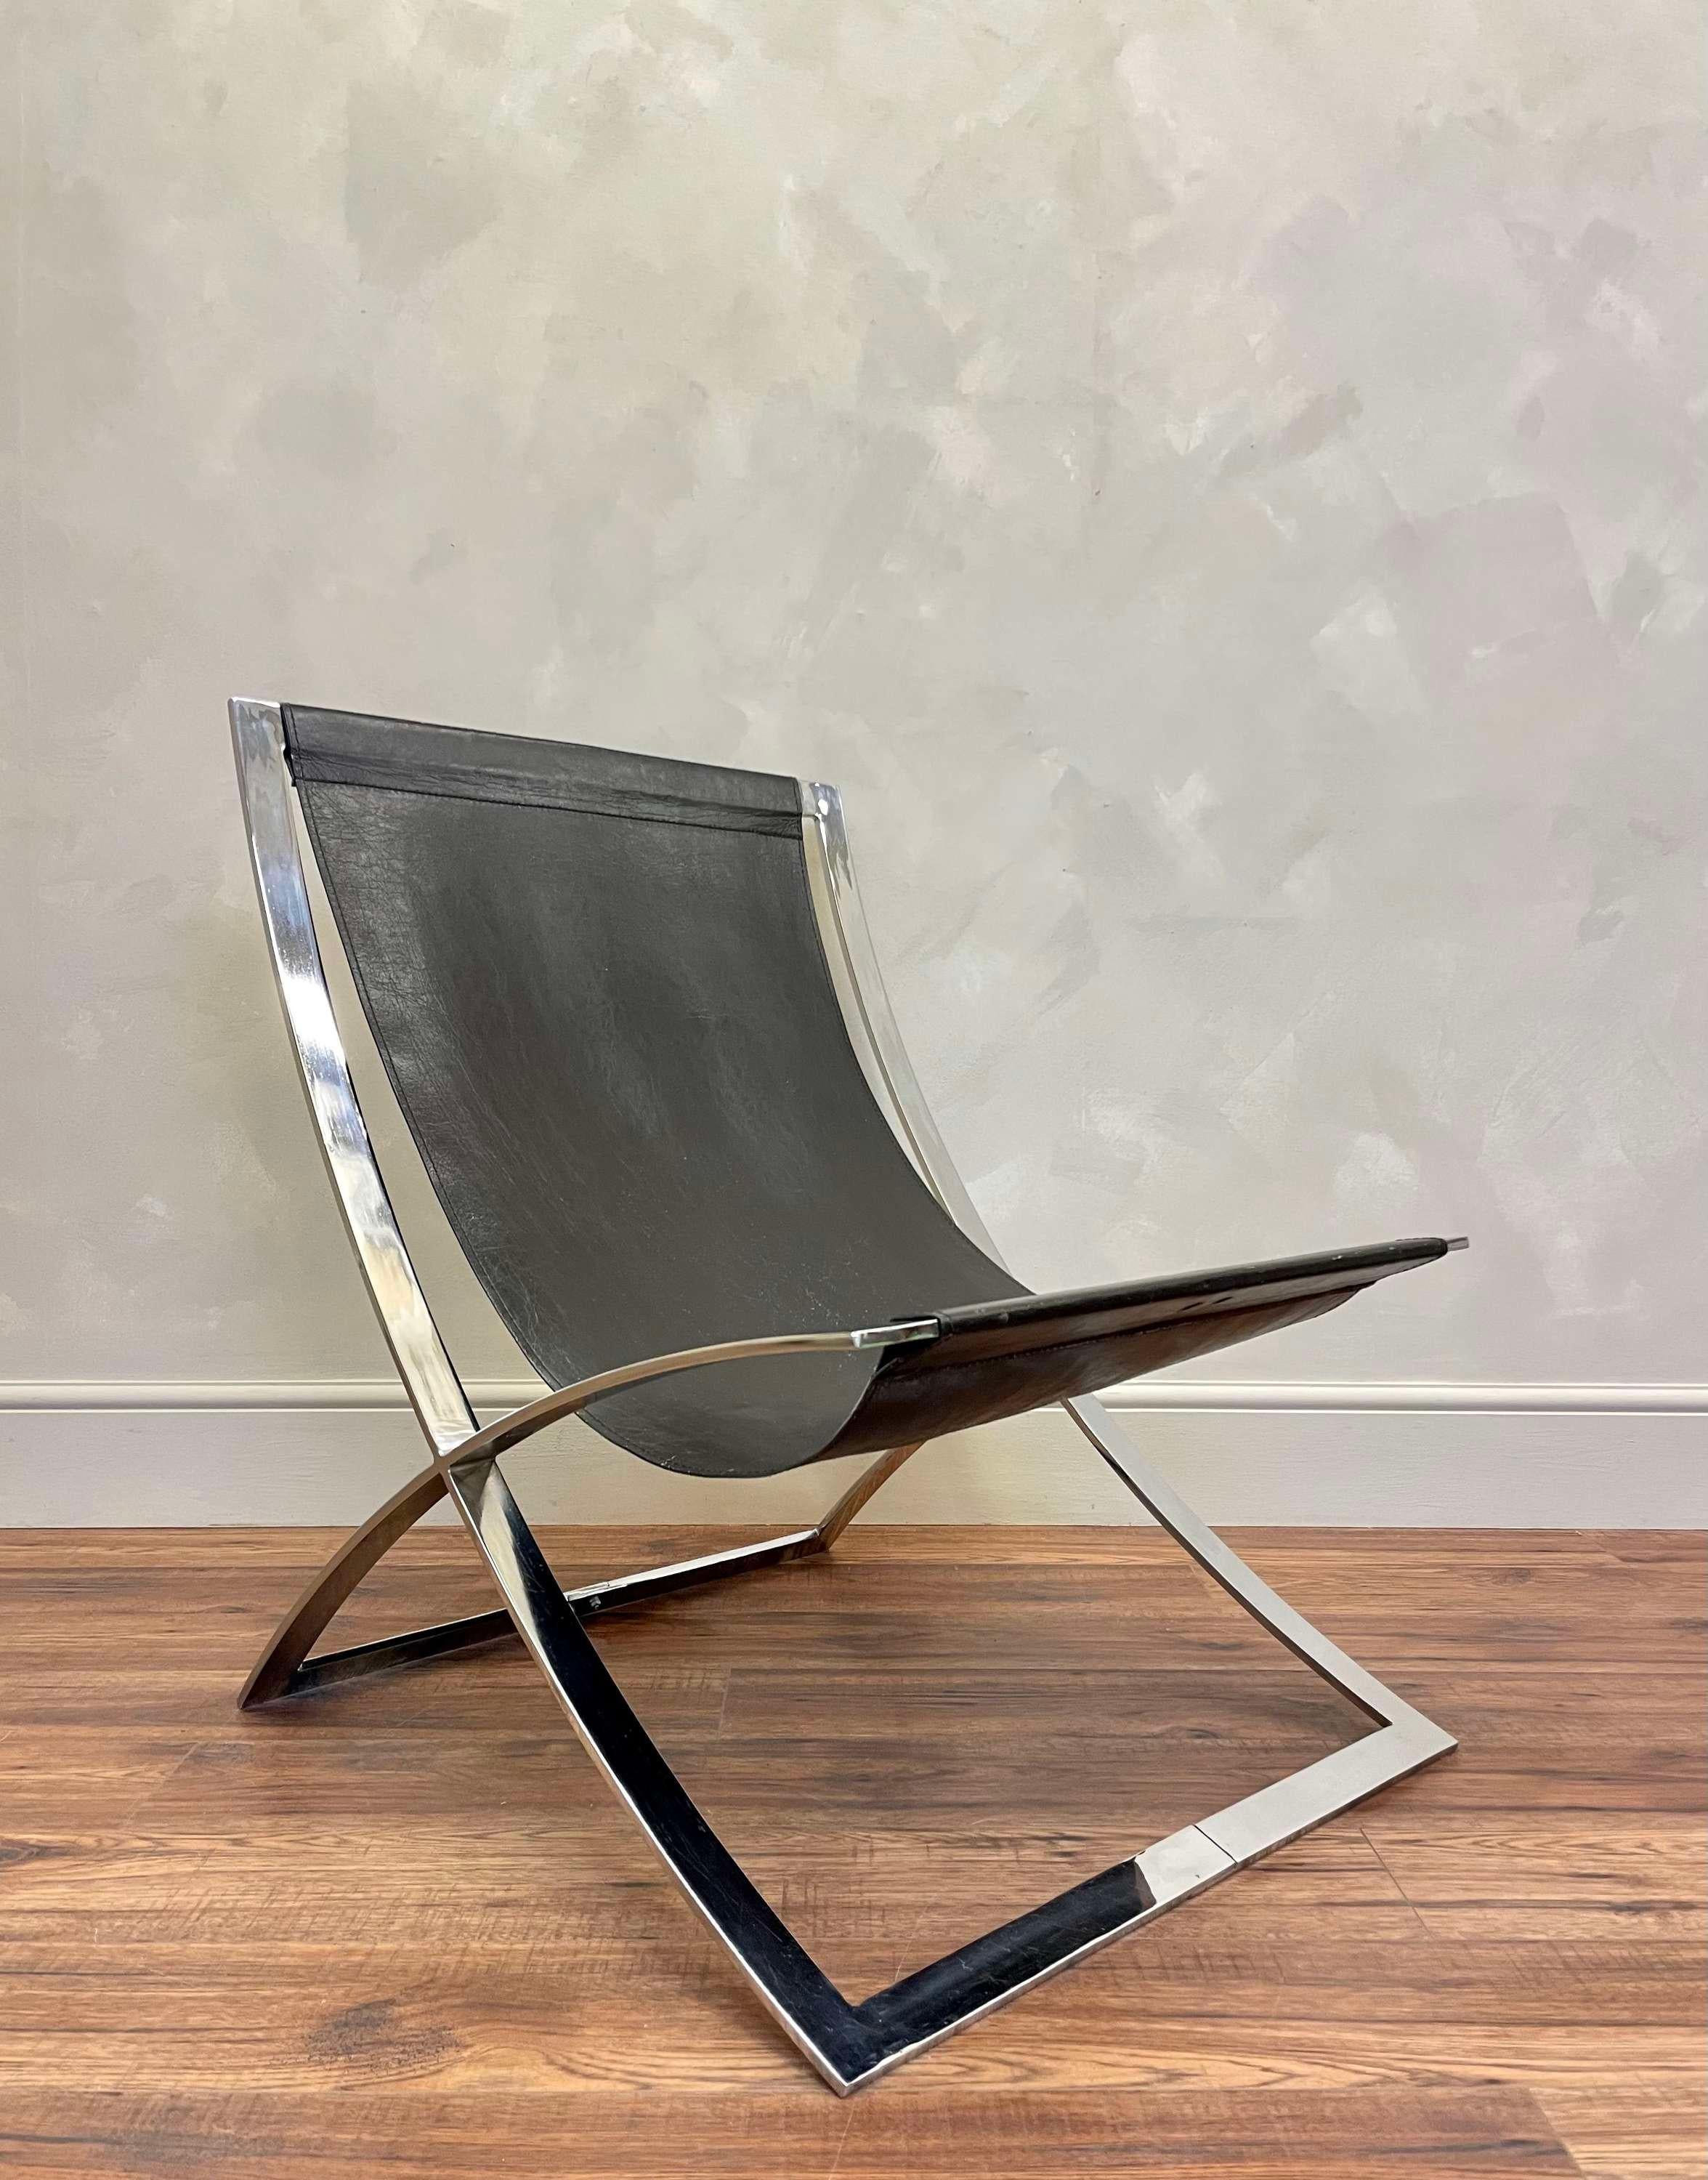 Leather and chrome scissor chair attributed to Italian Marcello Cuneo c1970.
Very stylish and in great condition.

Back height - 86 cm / 33.8